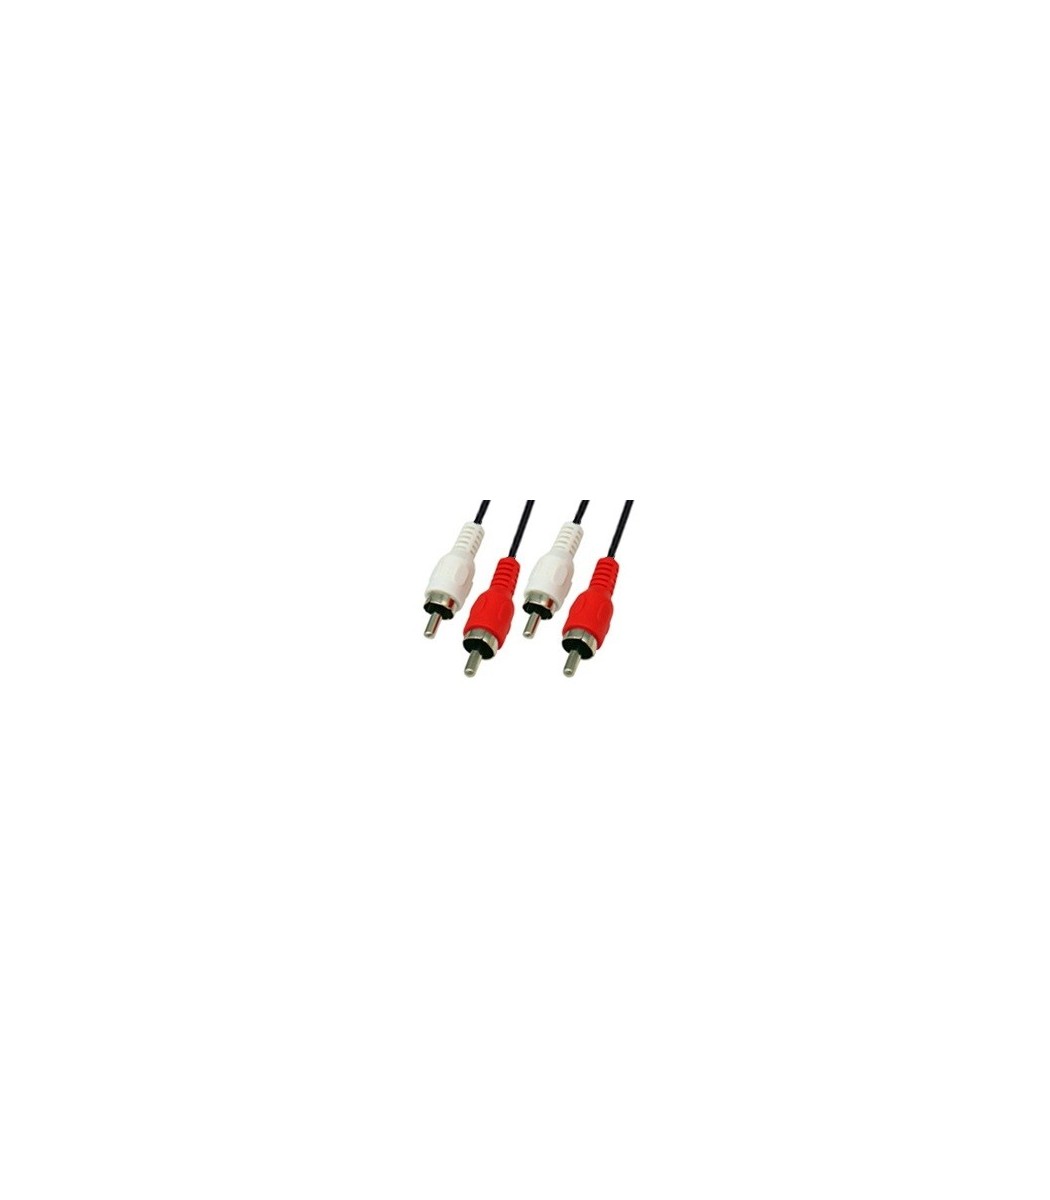 SOUND CABLE 2 MALE RCA TO 2 MALE RCA 10m